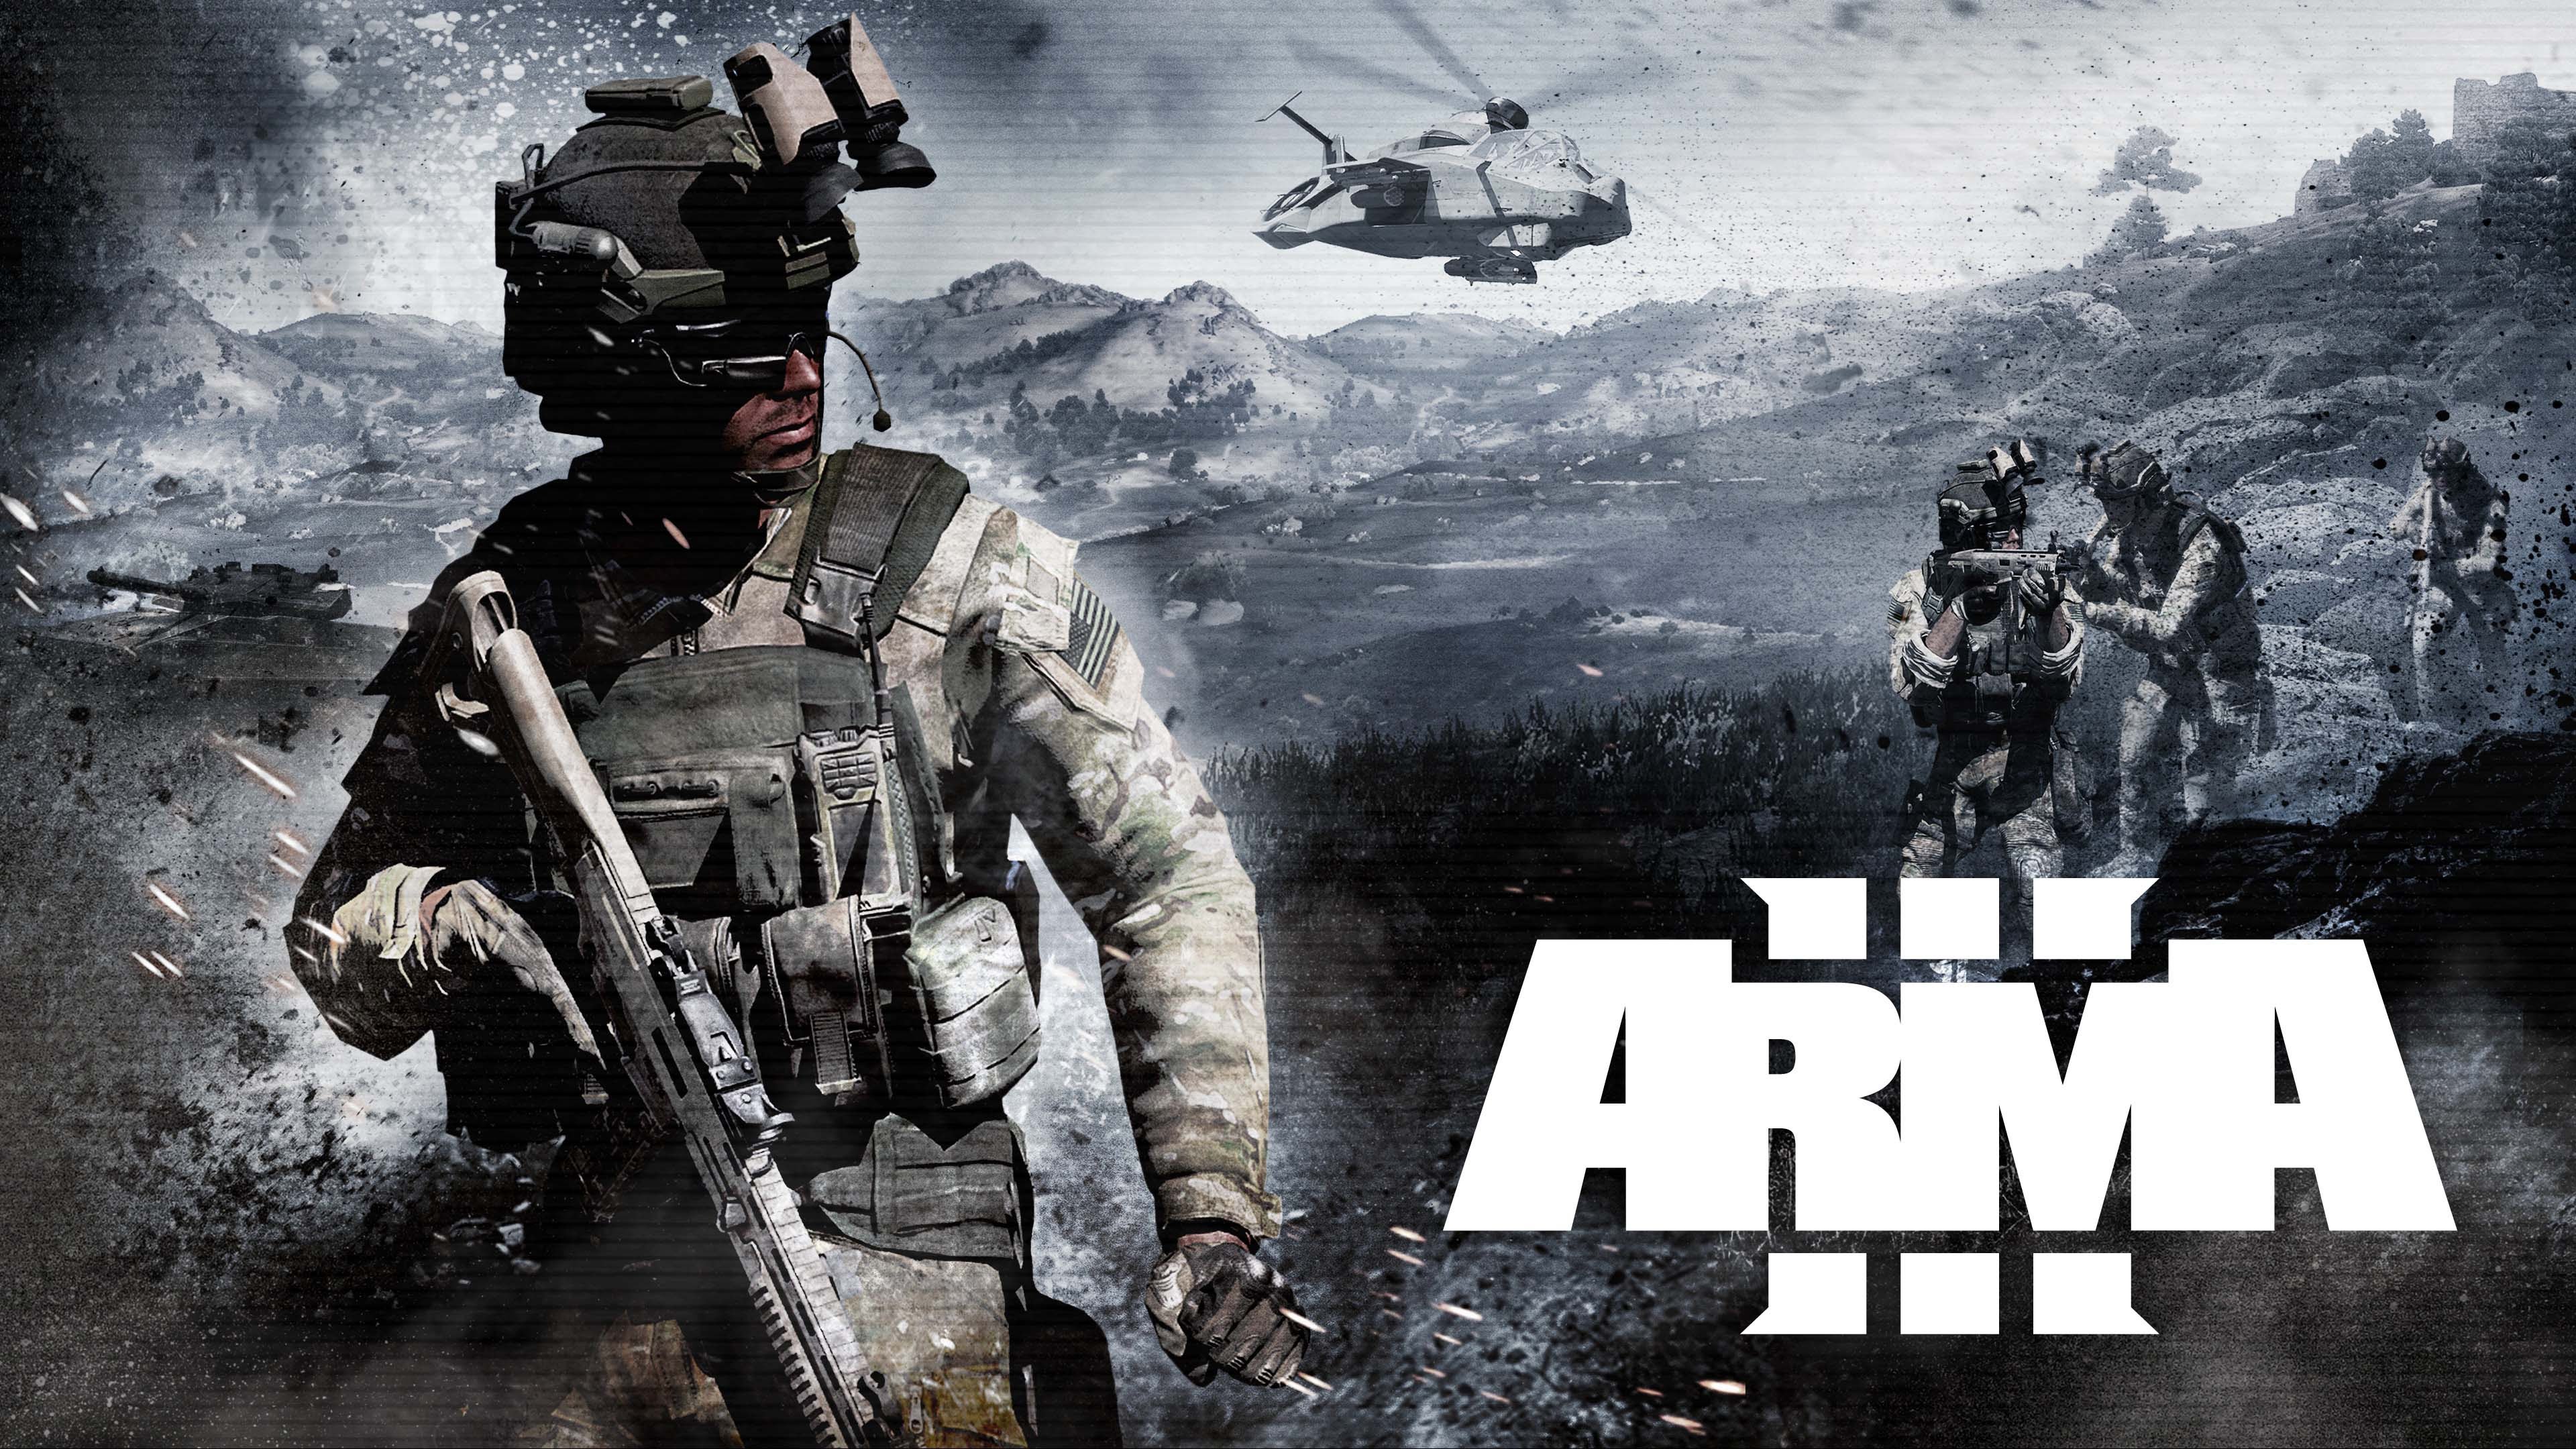 Arma 3 Soldier 3840x2160